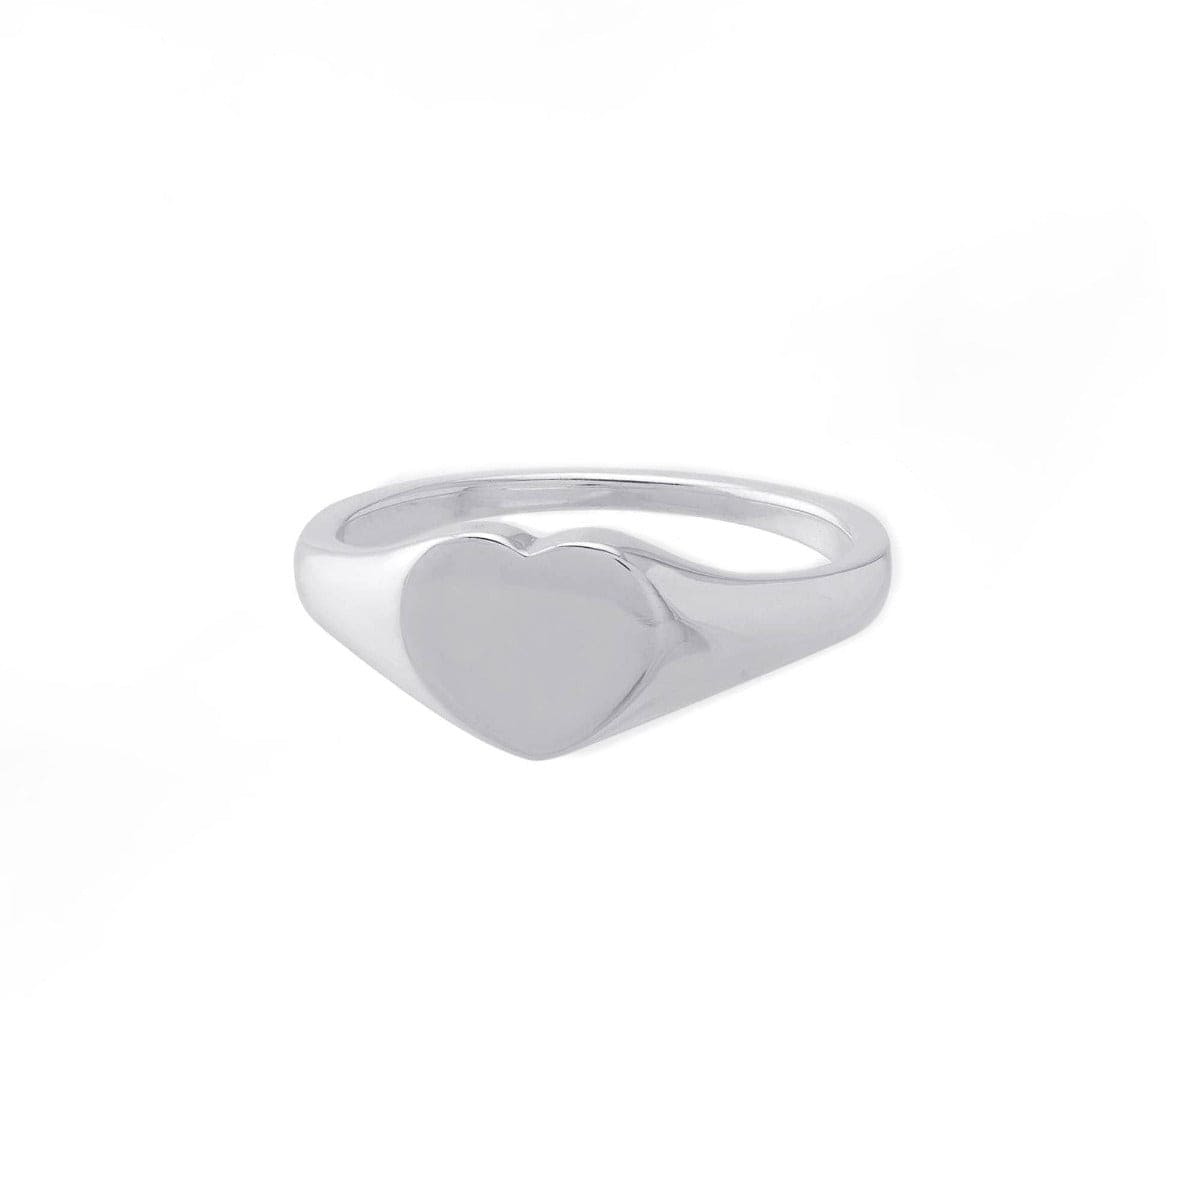 Boma Jewelry Rings 6 Heart Signet Ring